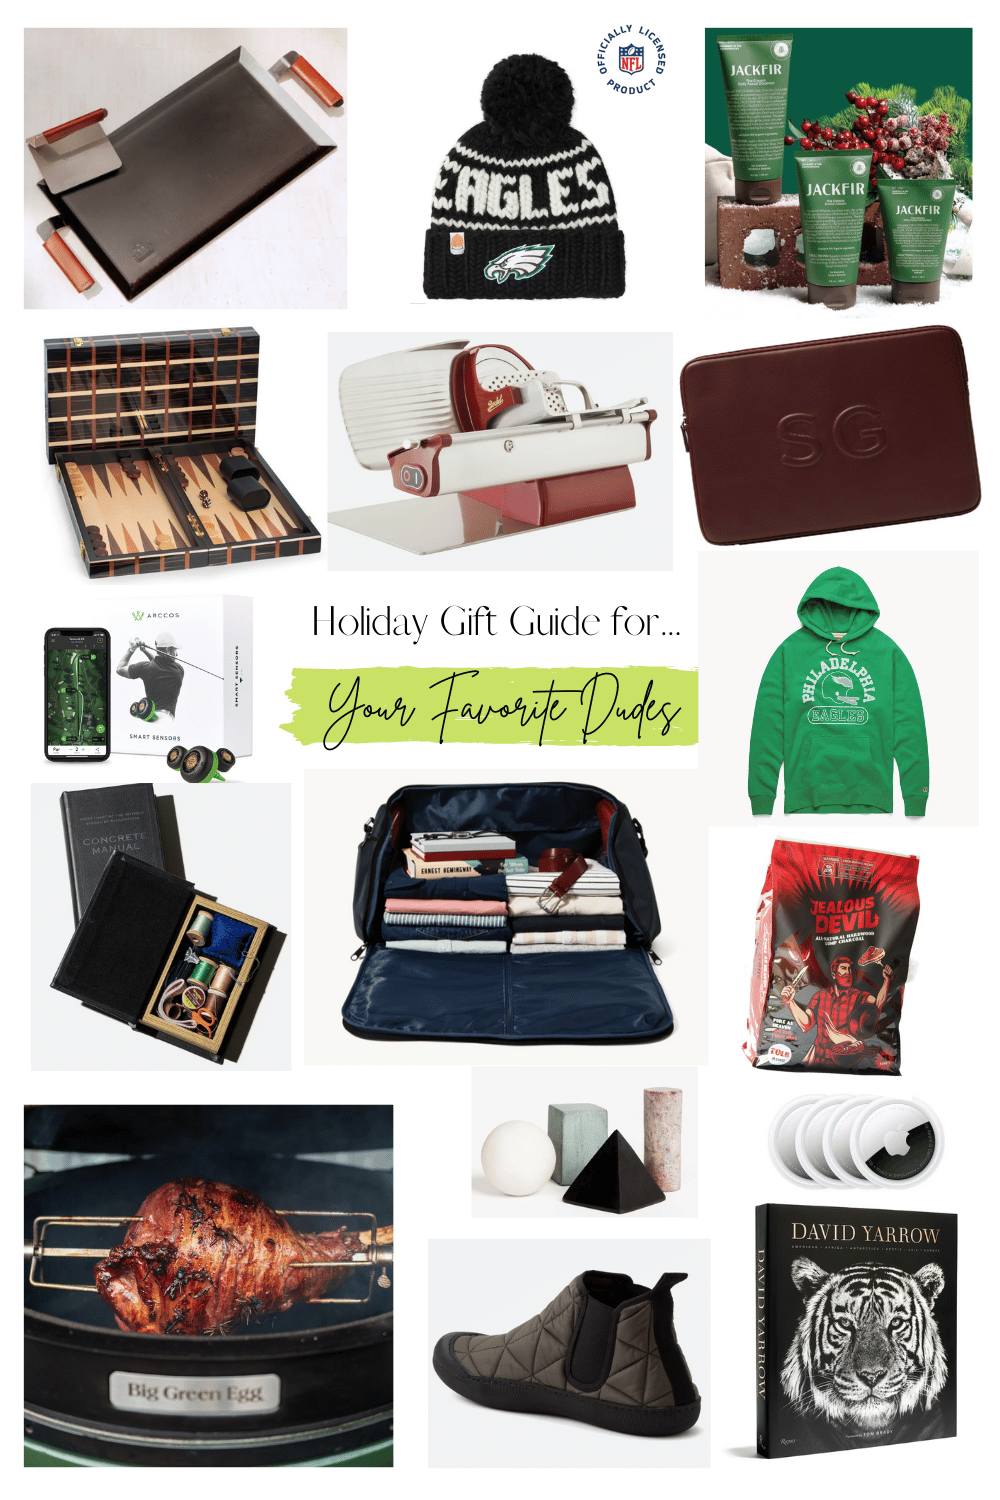 Holiday Gift Guide for Him 2022